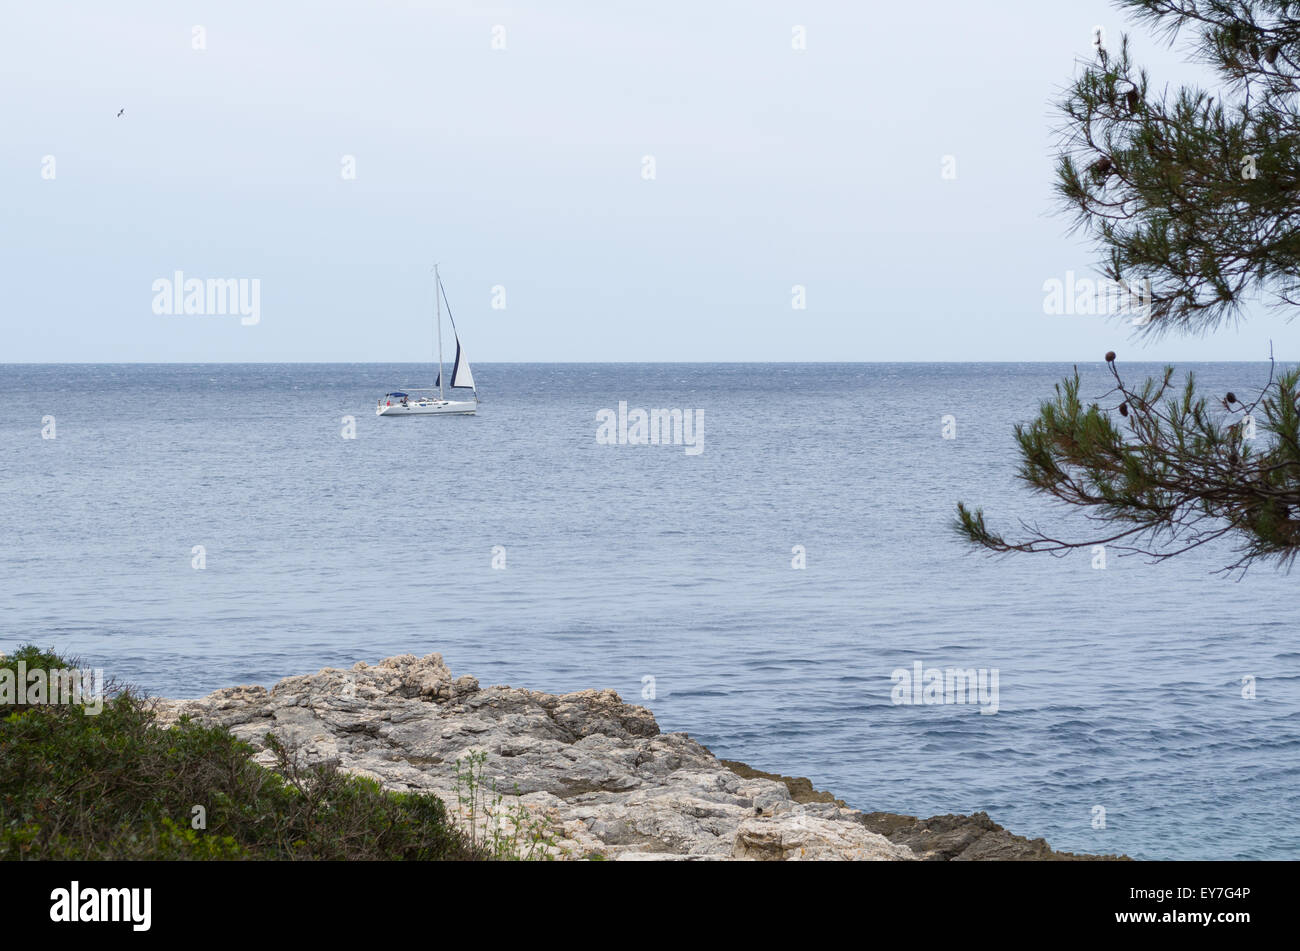 Sailboat on the Sea with Rocky Coast and Pine Stock Photo